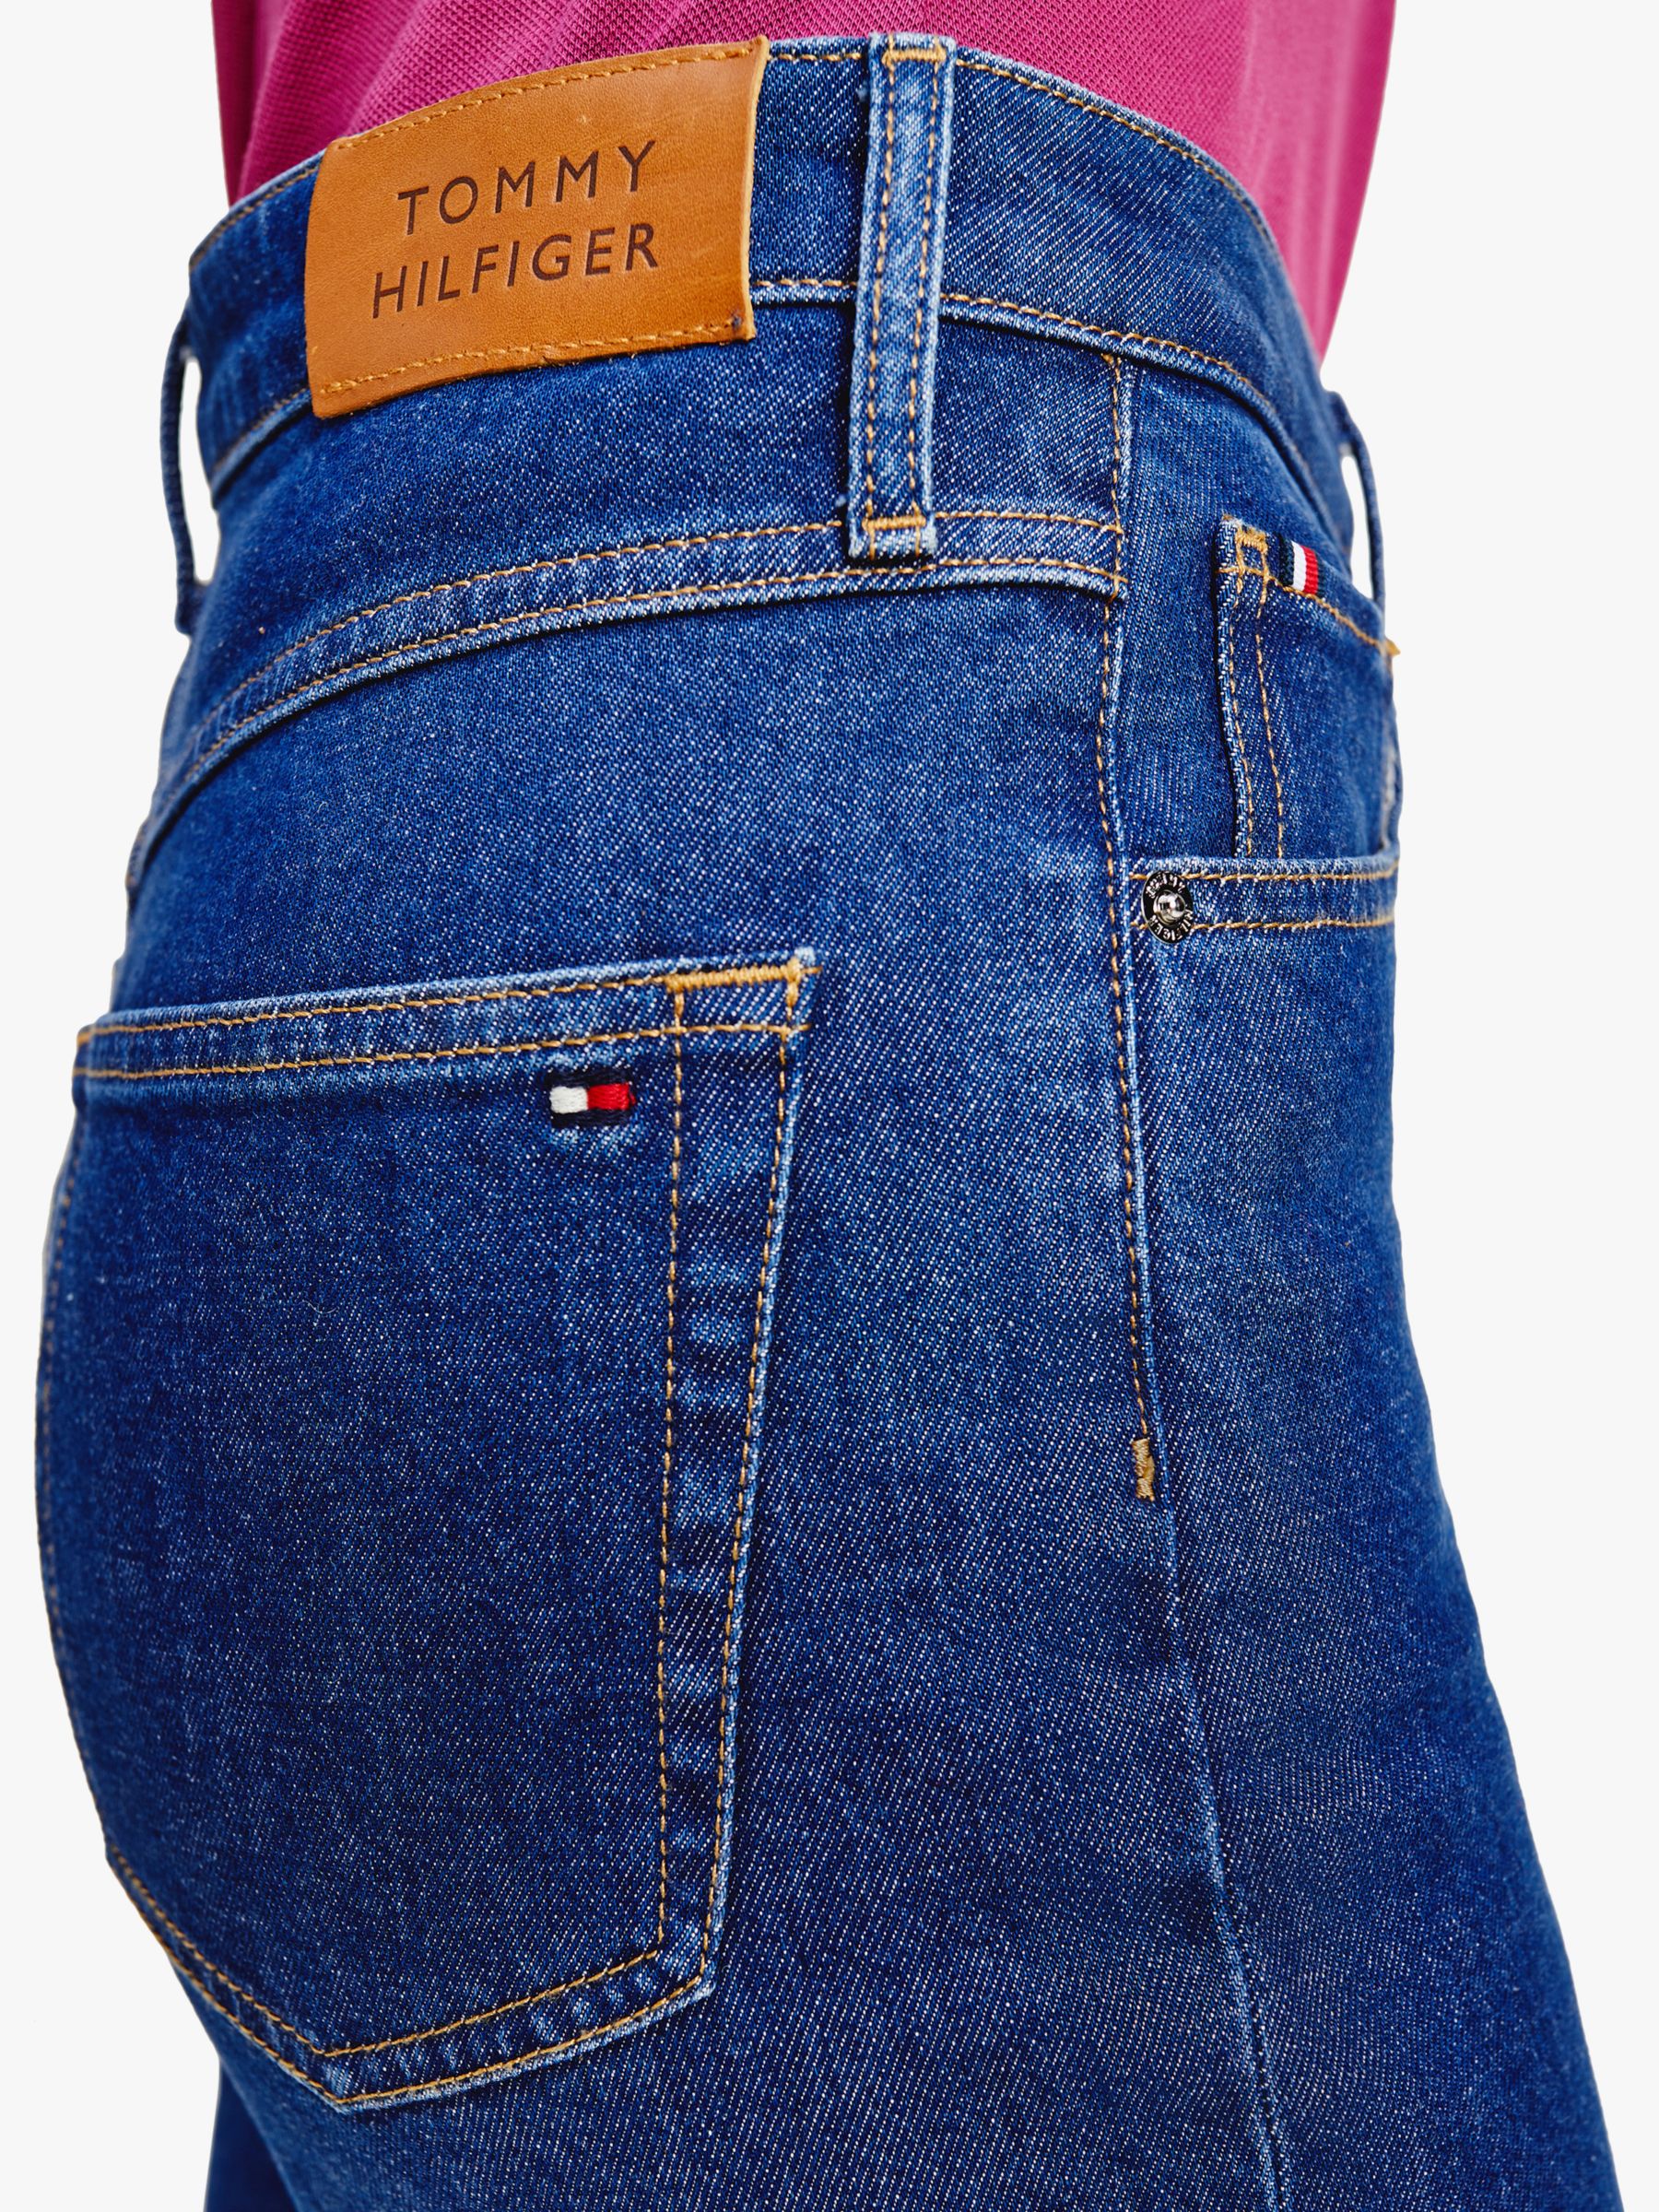 Buy Tommy Hilfiger High Rise Straight Leg Jeans, Tia Online at johnlewis.com